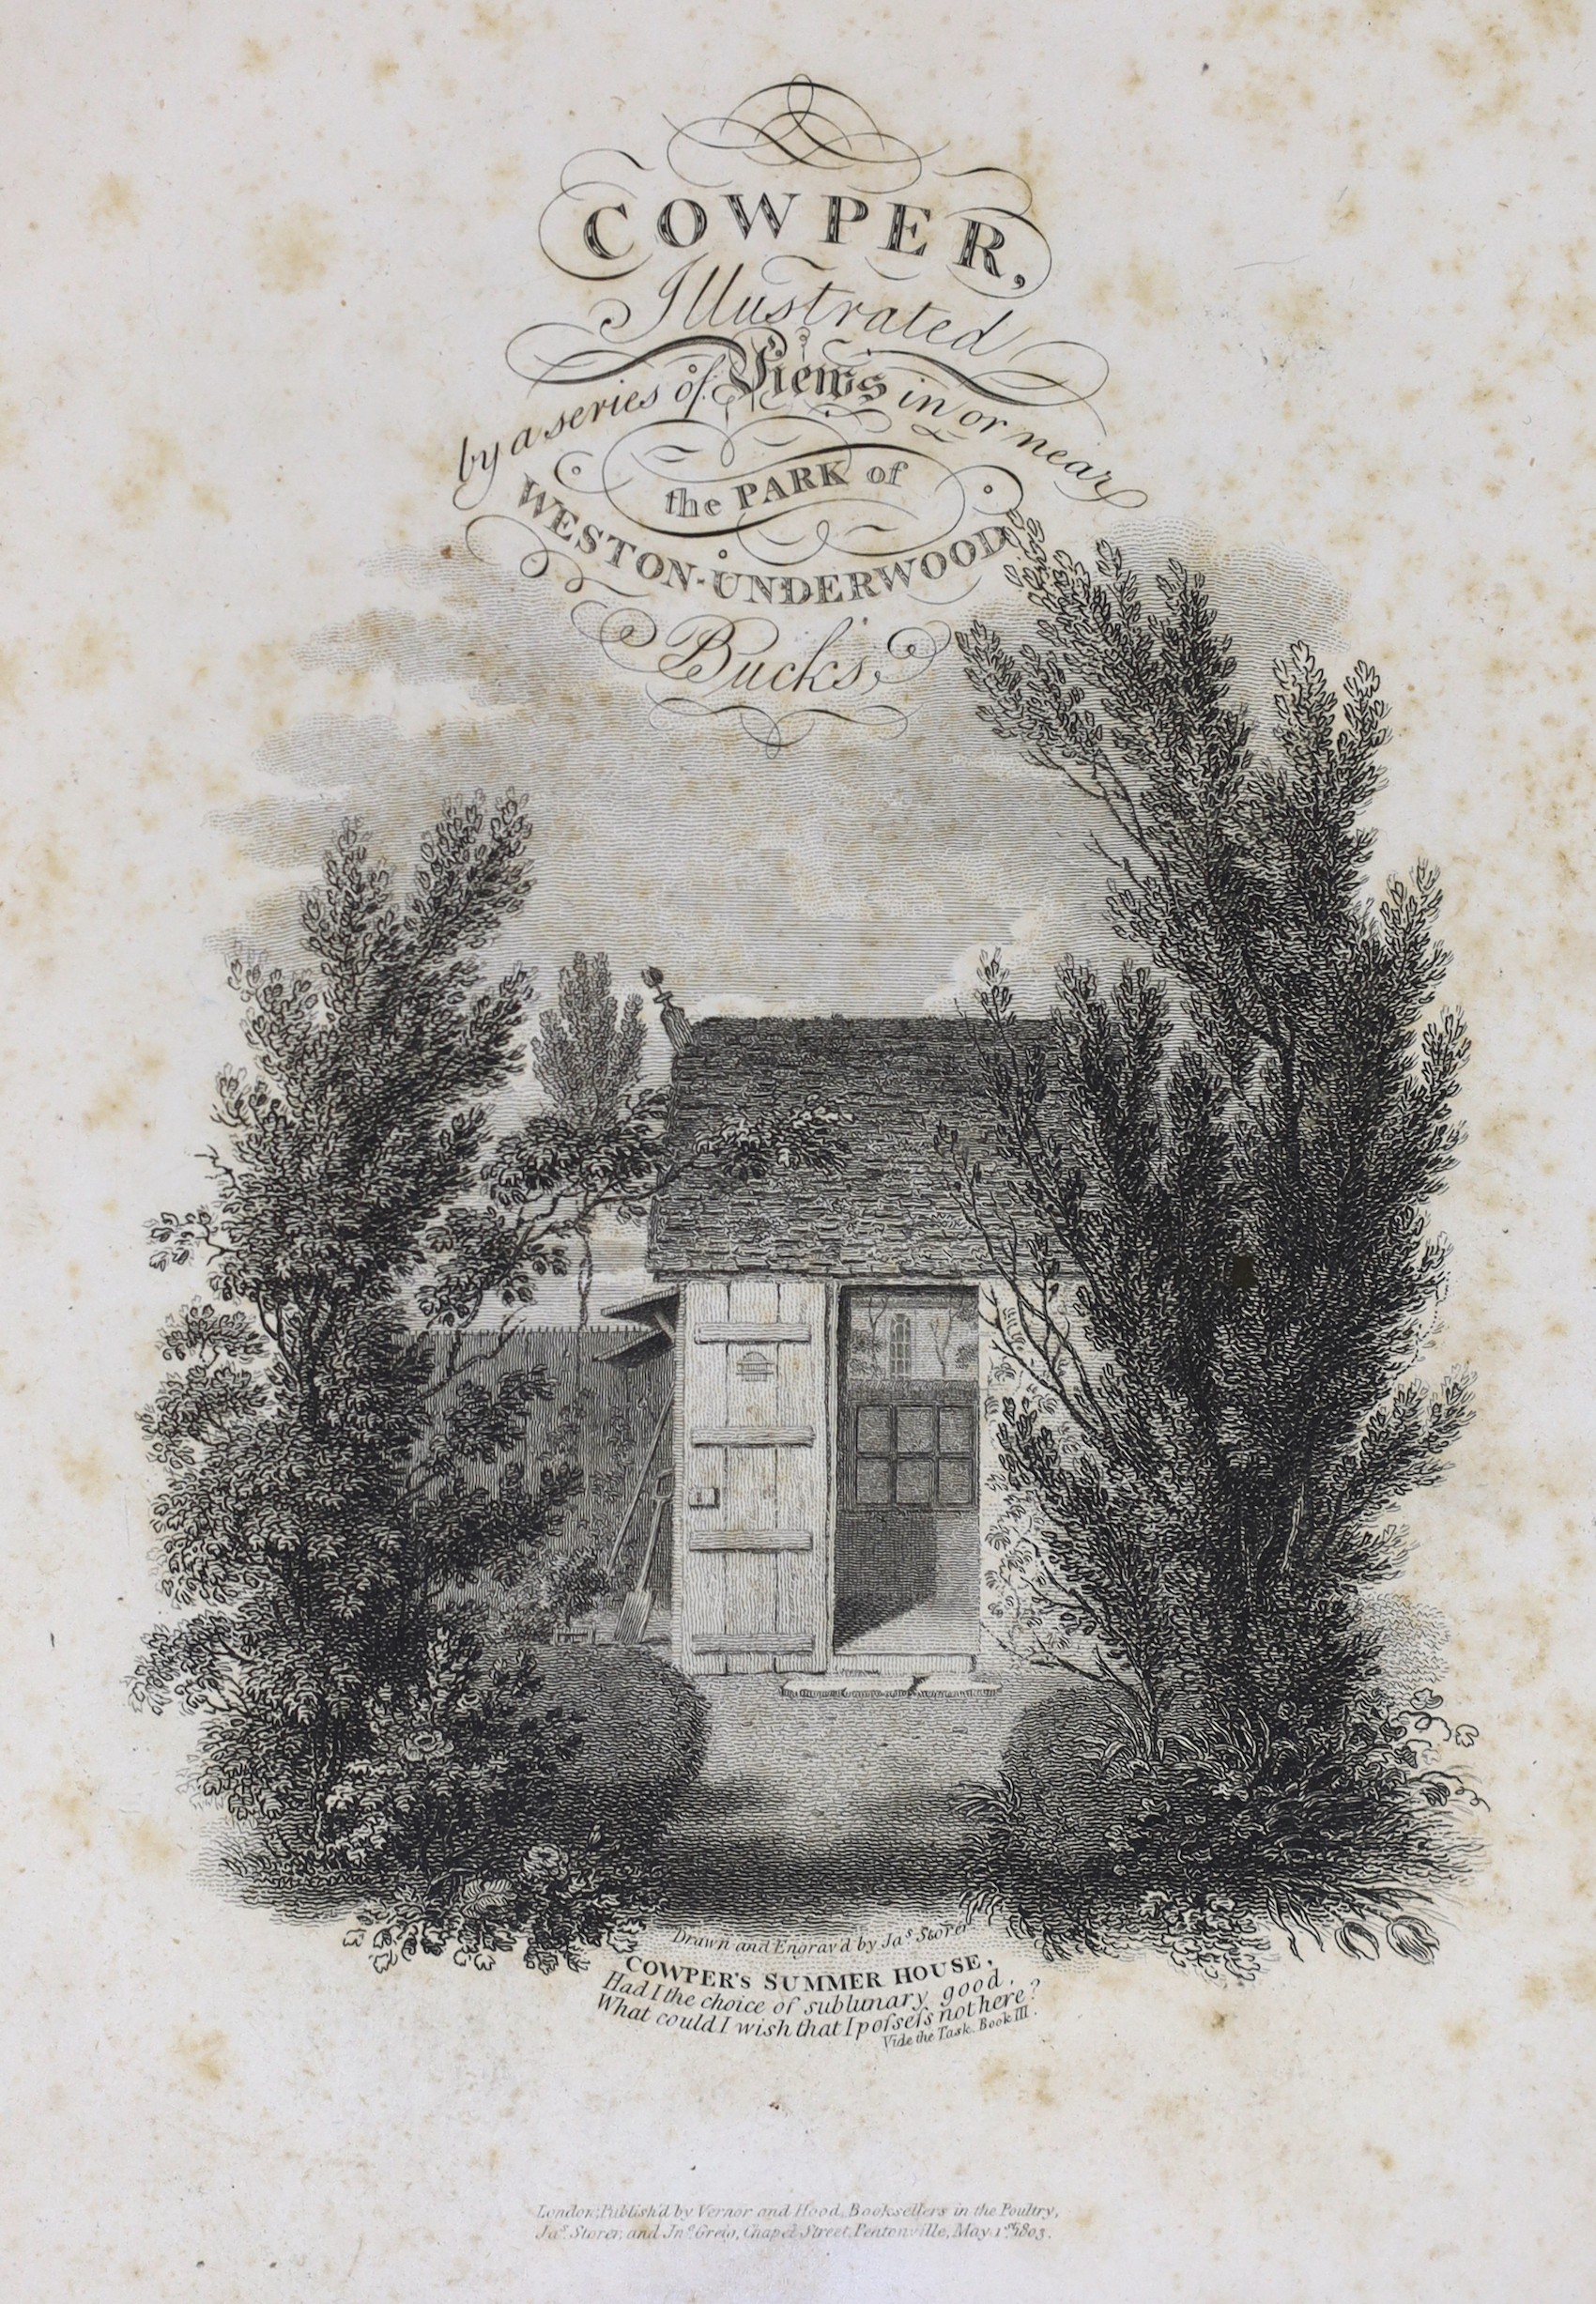 BUCKS: (Storer, James) The Rural Walks of Cowper; displayed in a series of views near Olney, Buckinghamshire ... with Descriptive Sketches, and a Memoir of the Poet's Life ... 16 plates, half title; old marbled boards wi